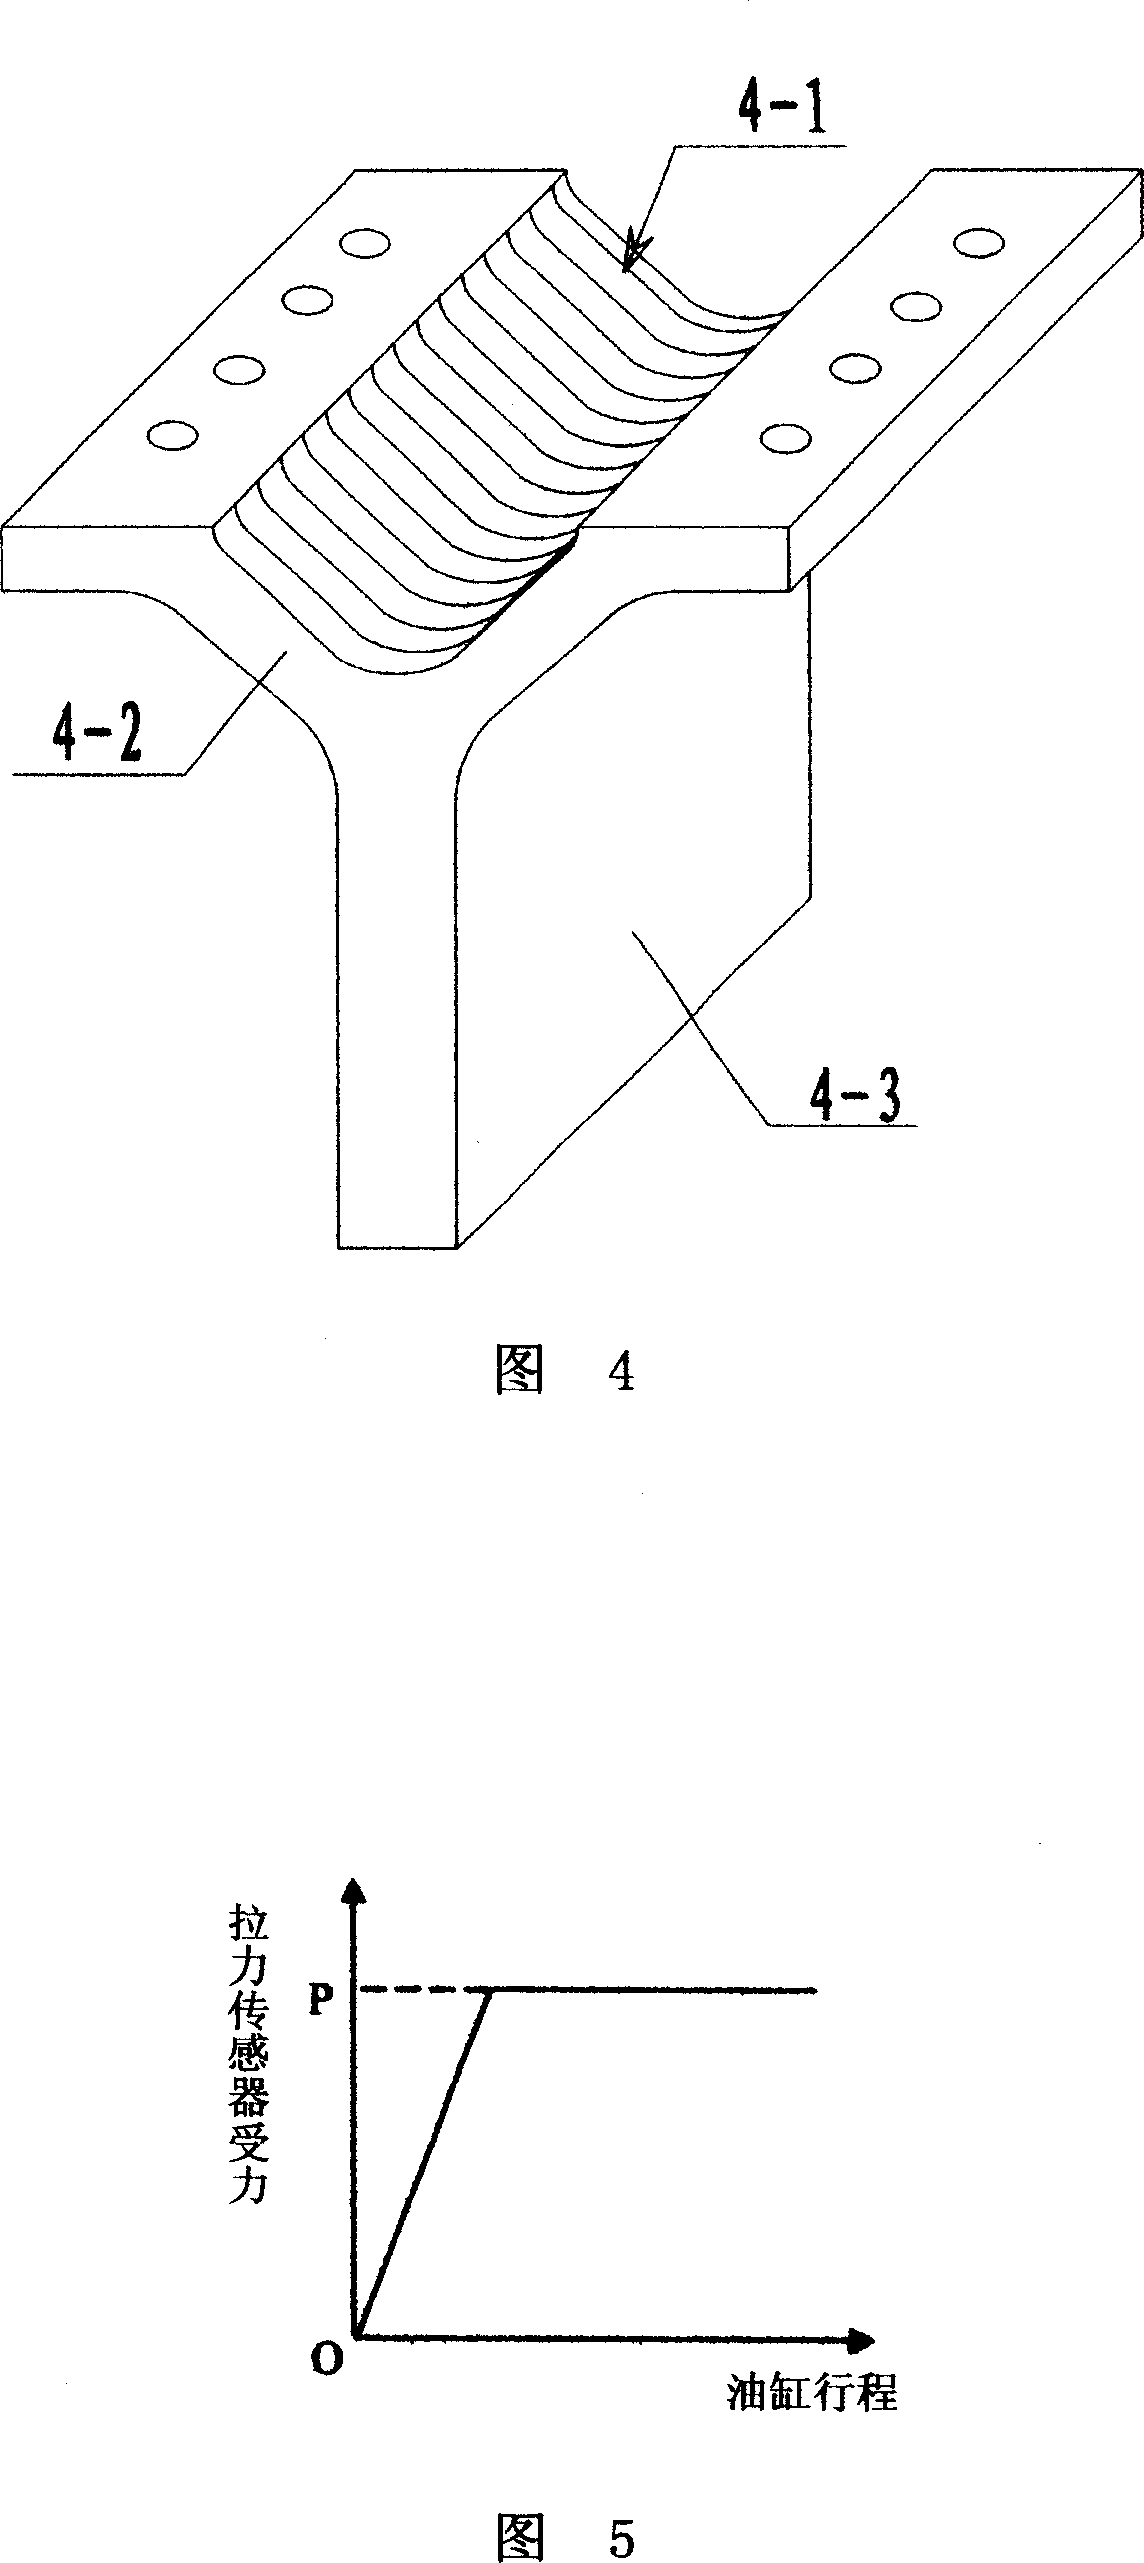 Steel cable stretching force detecting apparatus